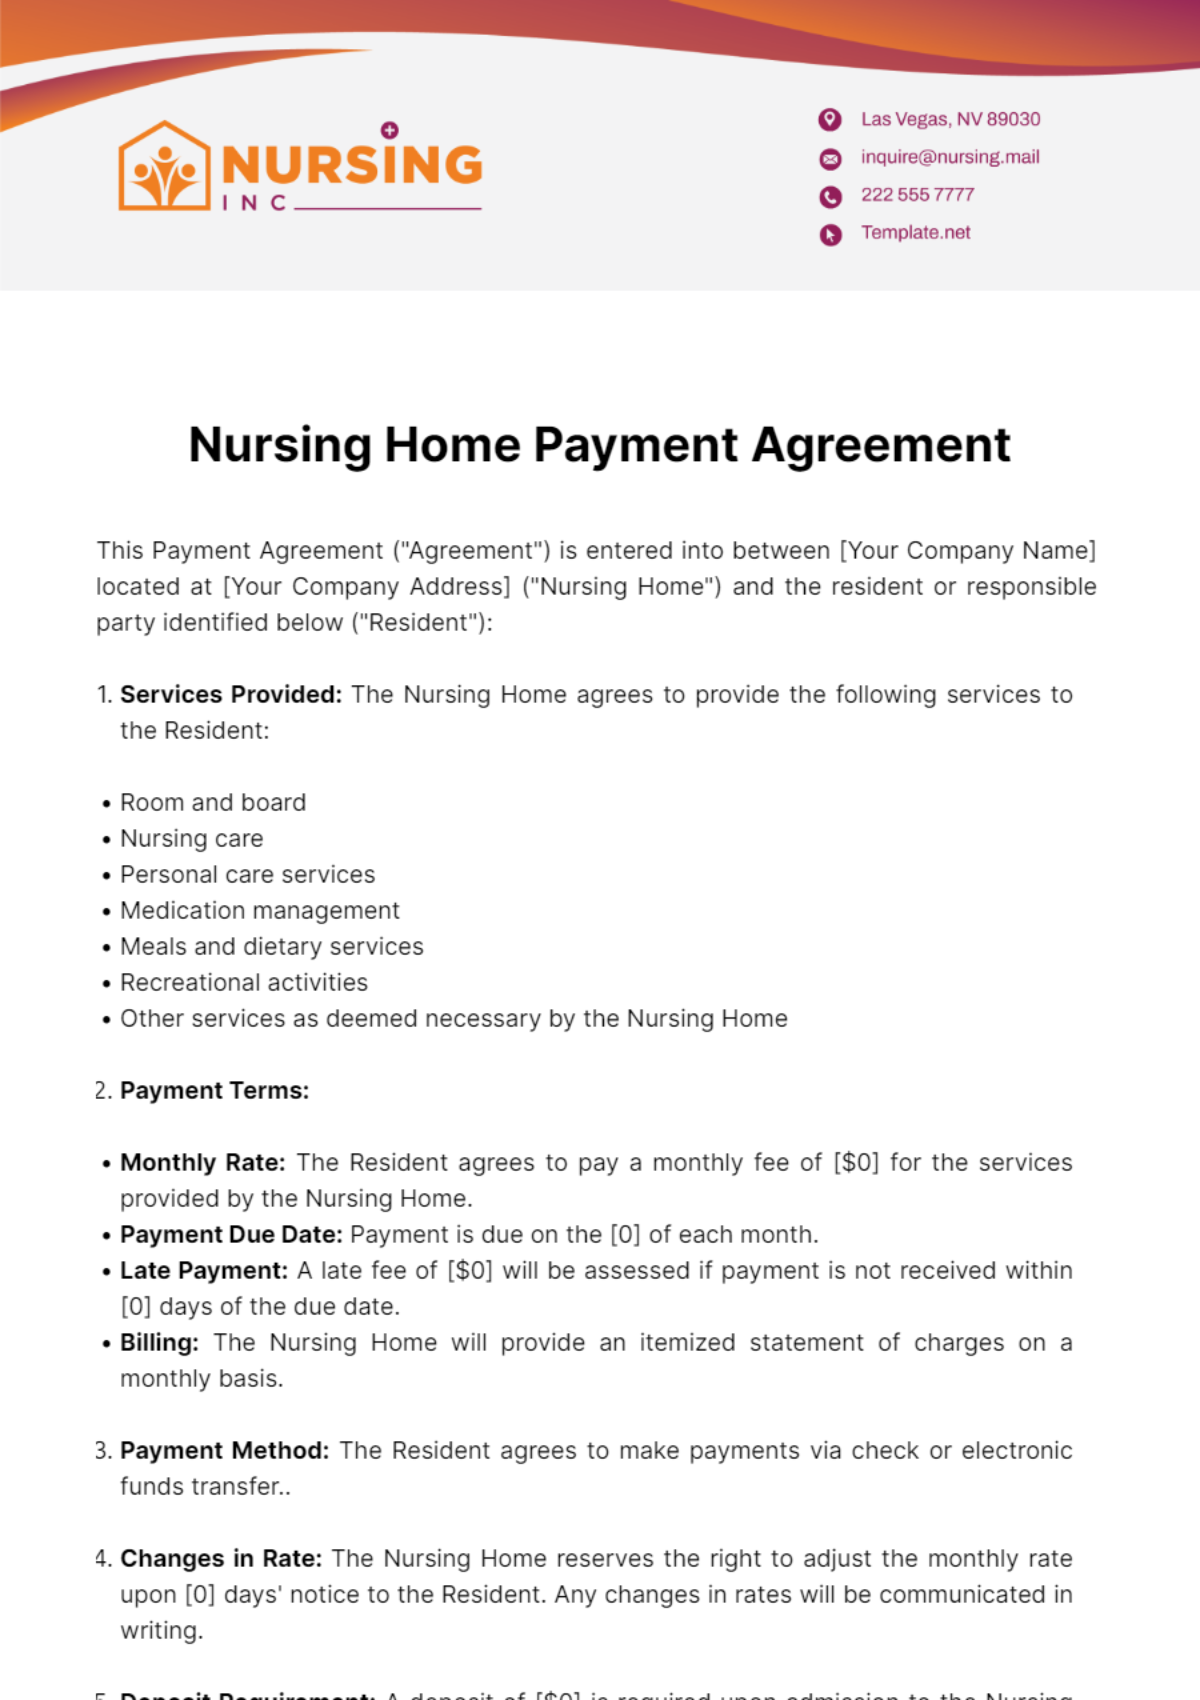 Nursing Home Payment Agreement Template